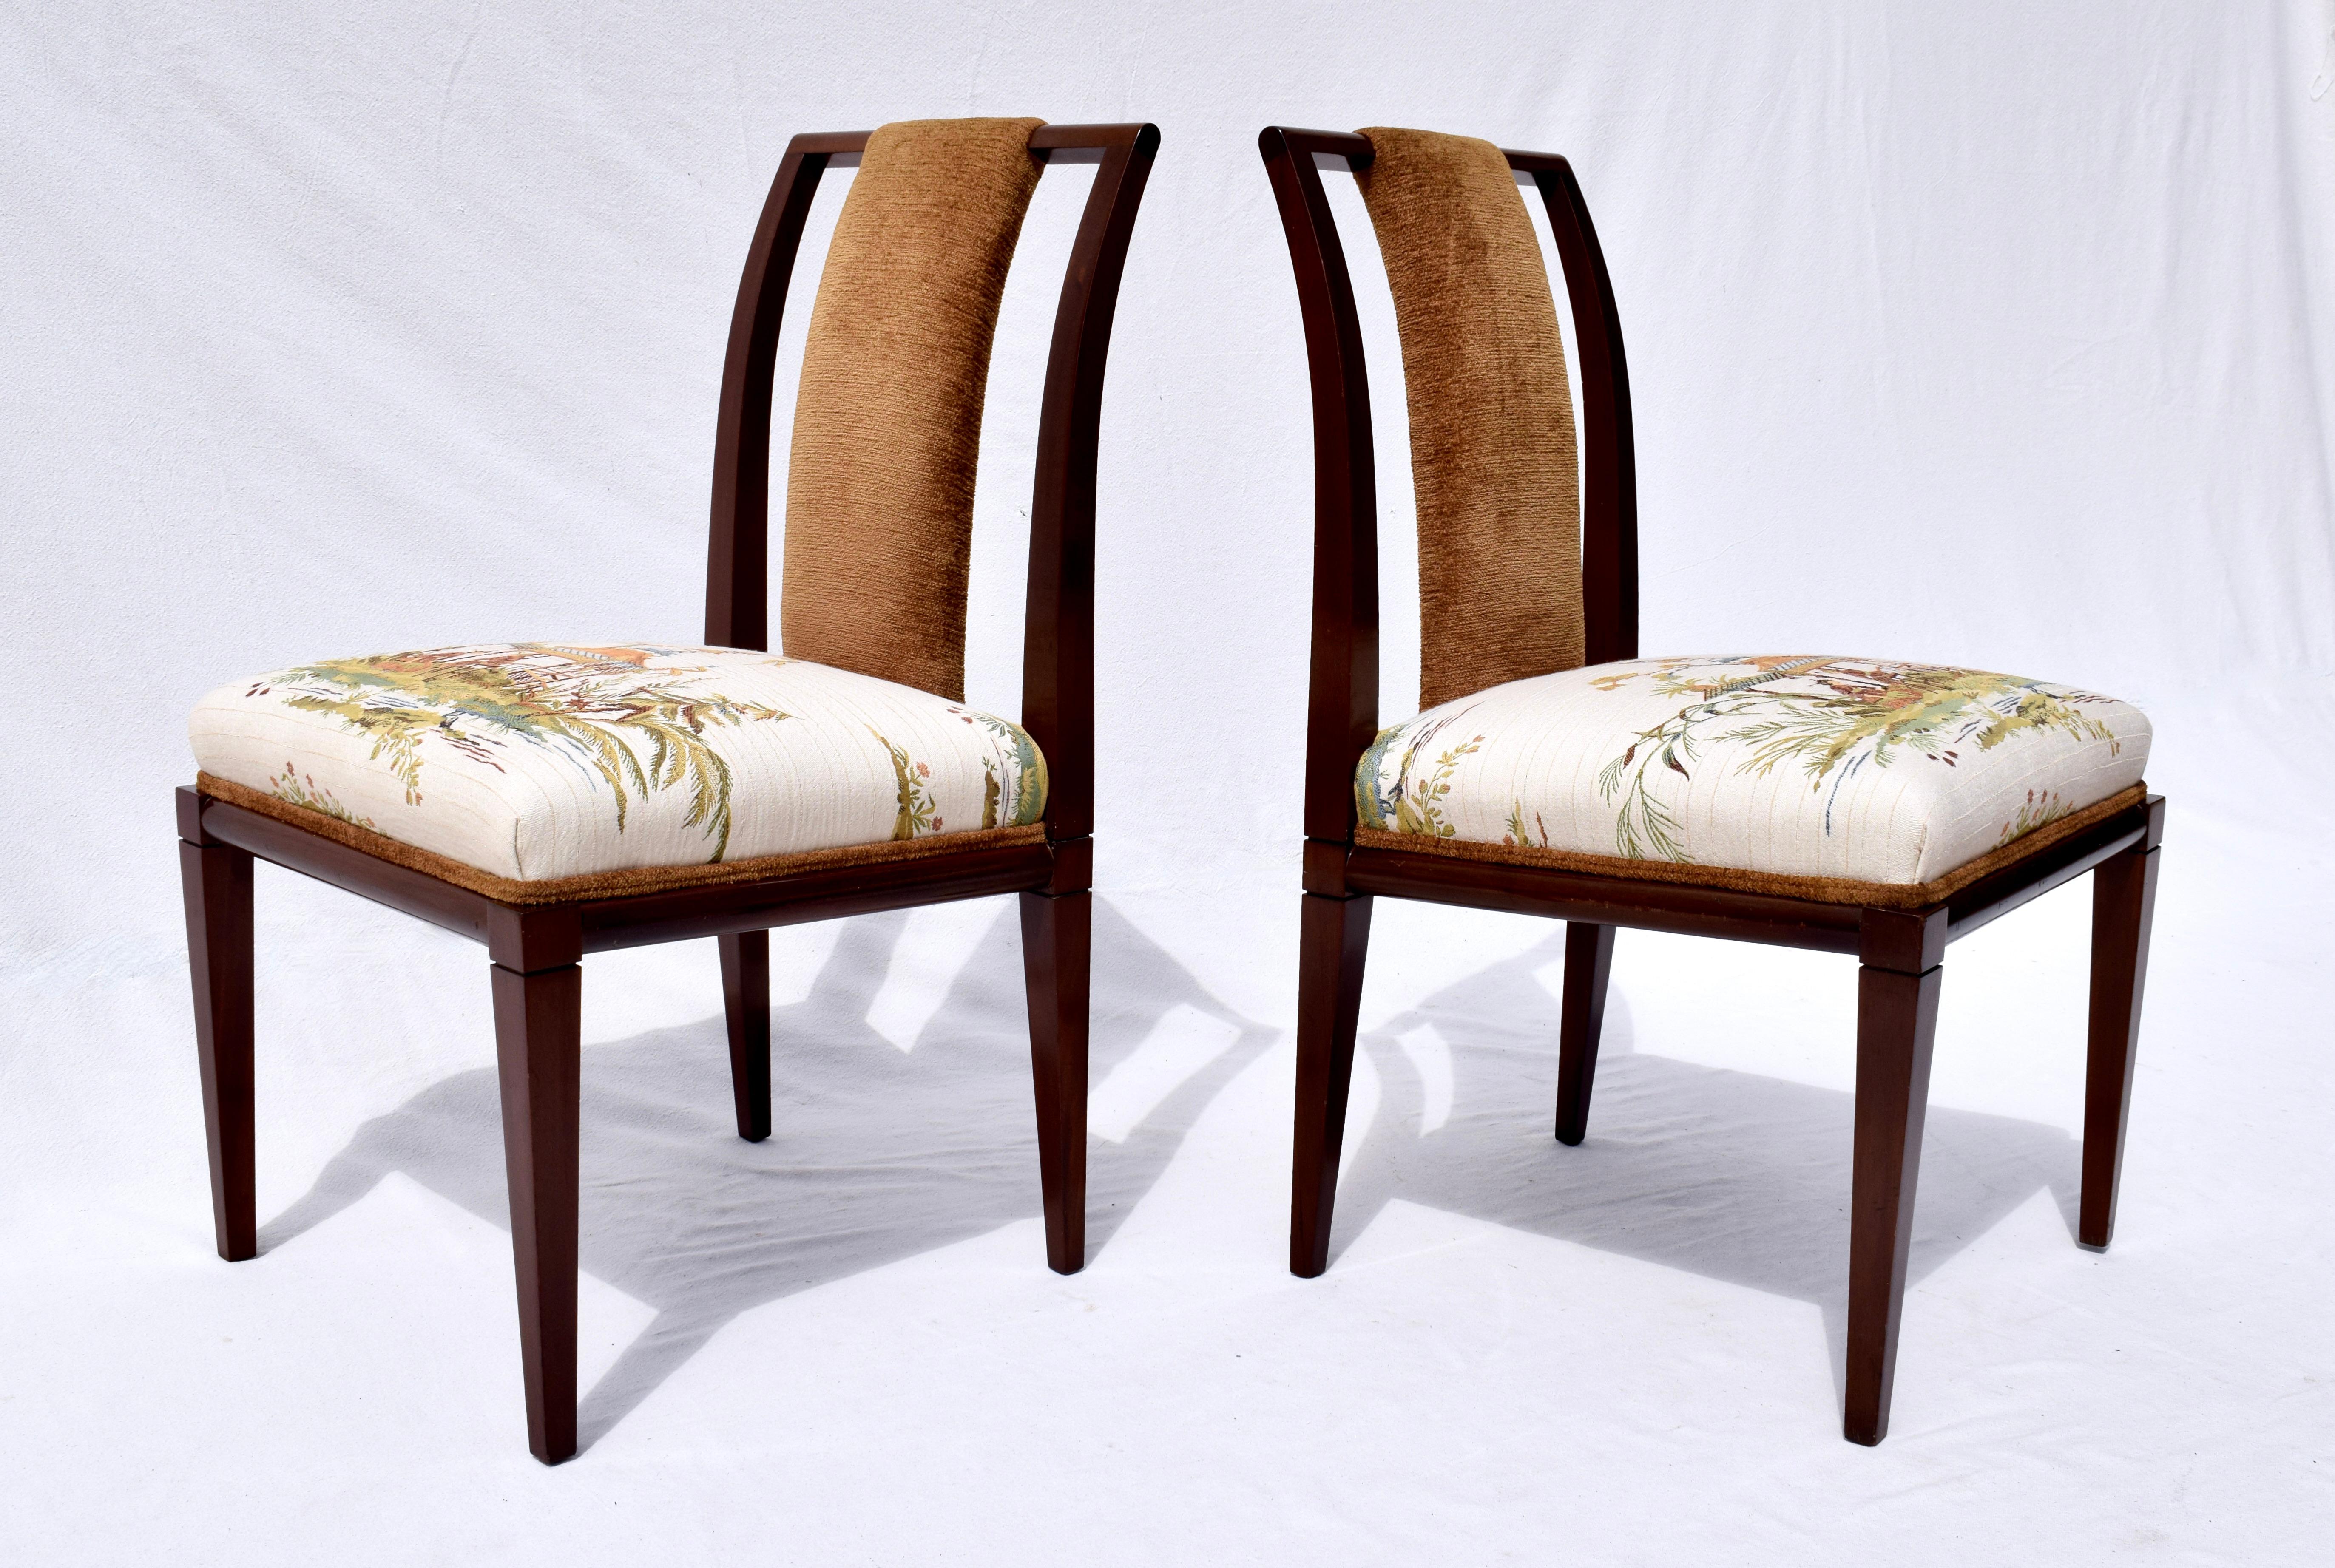 1950's Tommi Parzinger Dining Chairs in Brunschwig & Fils For Sale 3